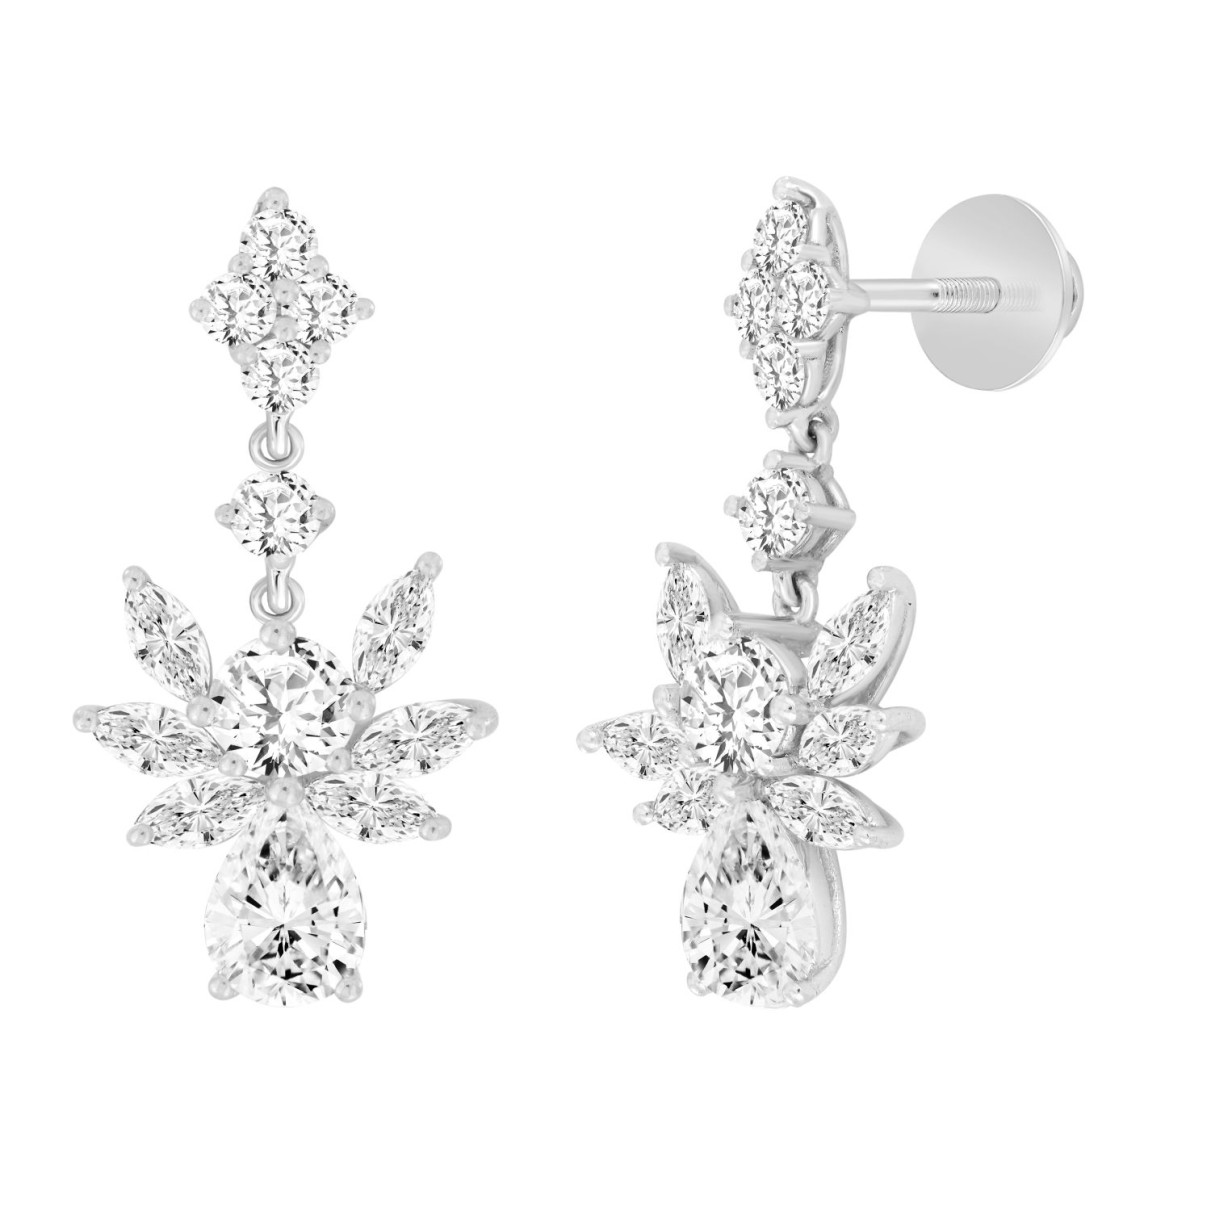 LADIES EARRINGS 7CT ROUND/MARQUISE/PEAR DIAMOND 14K WHITE GOLD